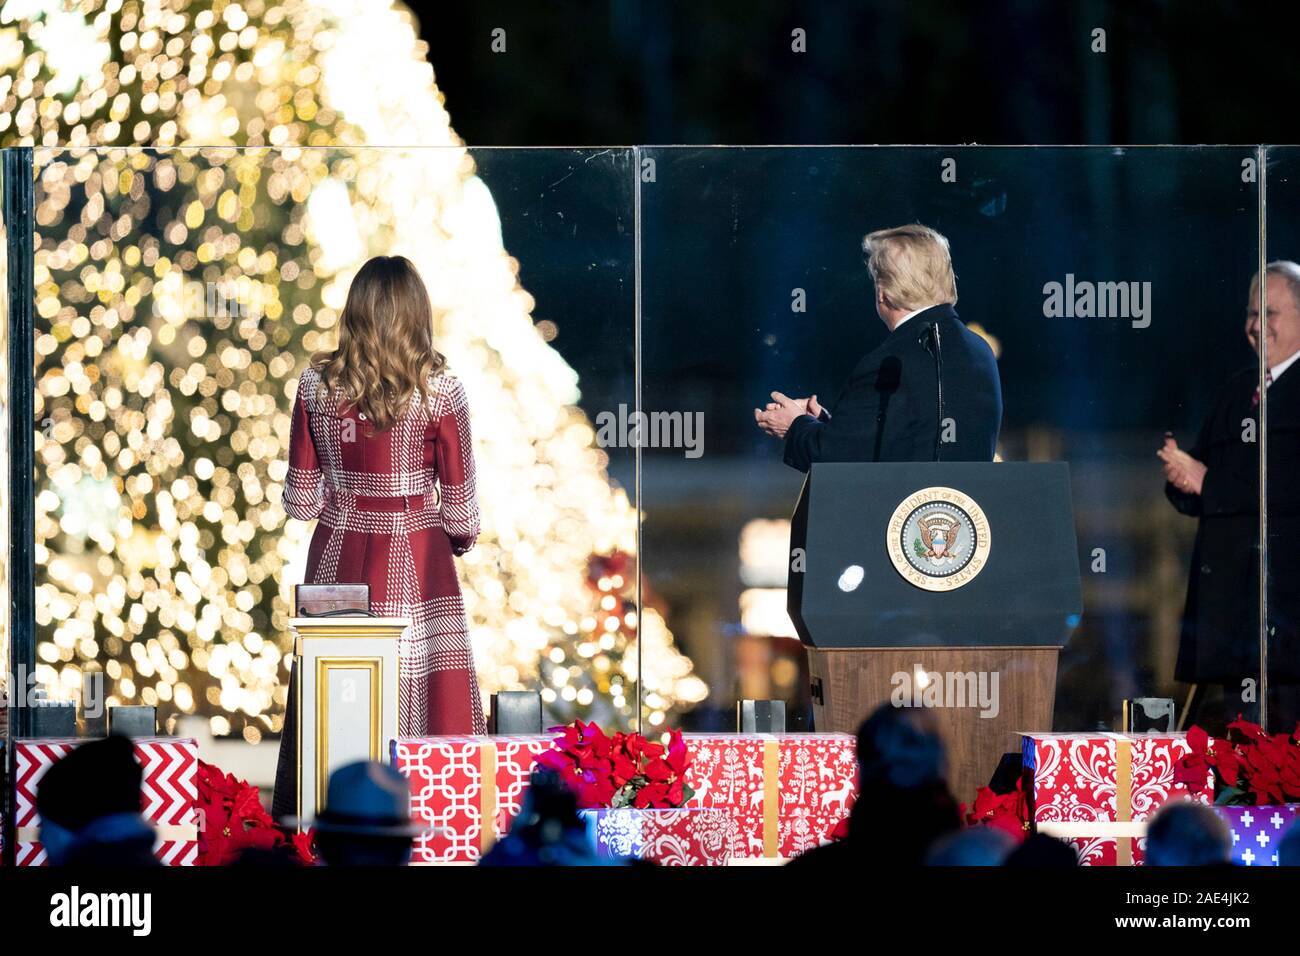 Washington DC, USA. 05 December, 2019. U.S President Donald Trump and First Lady Melania Trump during the 97th annual National Christmas Tree Lighting 2019 ceremony on the Ellipse December 5, 2019 in Washington, D.C. Credit: Andrea Hanks/White House Photo/Alamy Live News Stock Photo